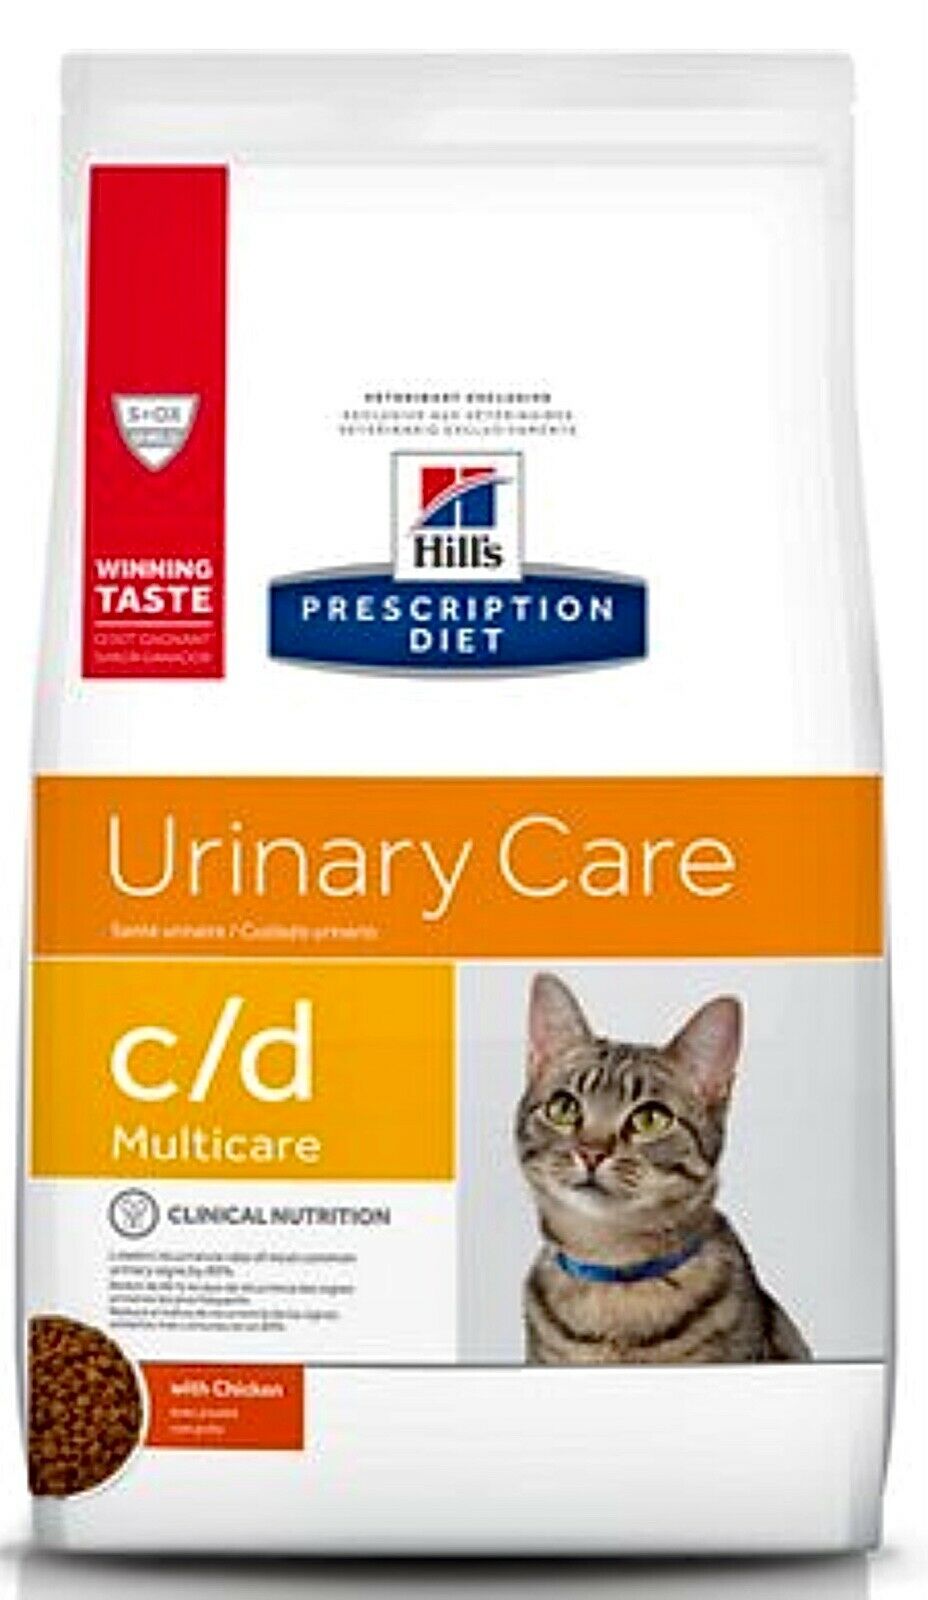 Hill's Diet c/d Multicare Urinary Care Chicken Dry Cat Food 17.6 lb - free ship